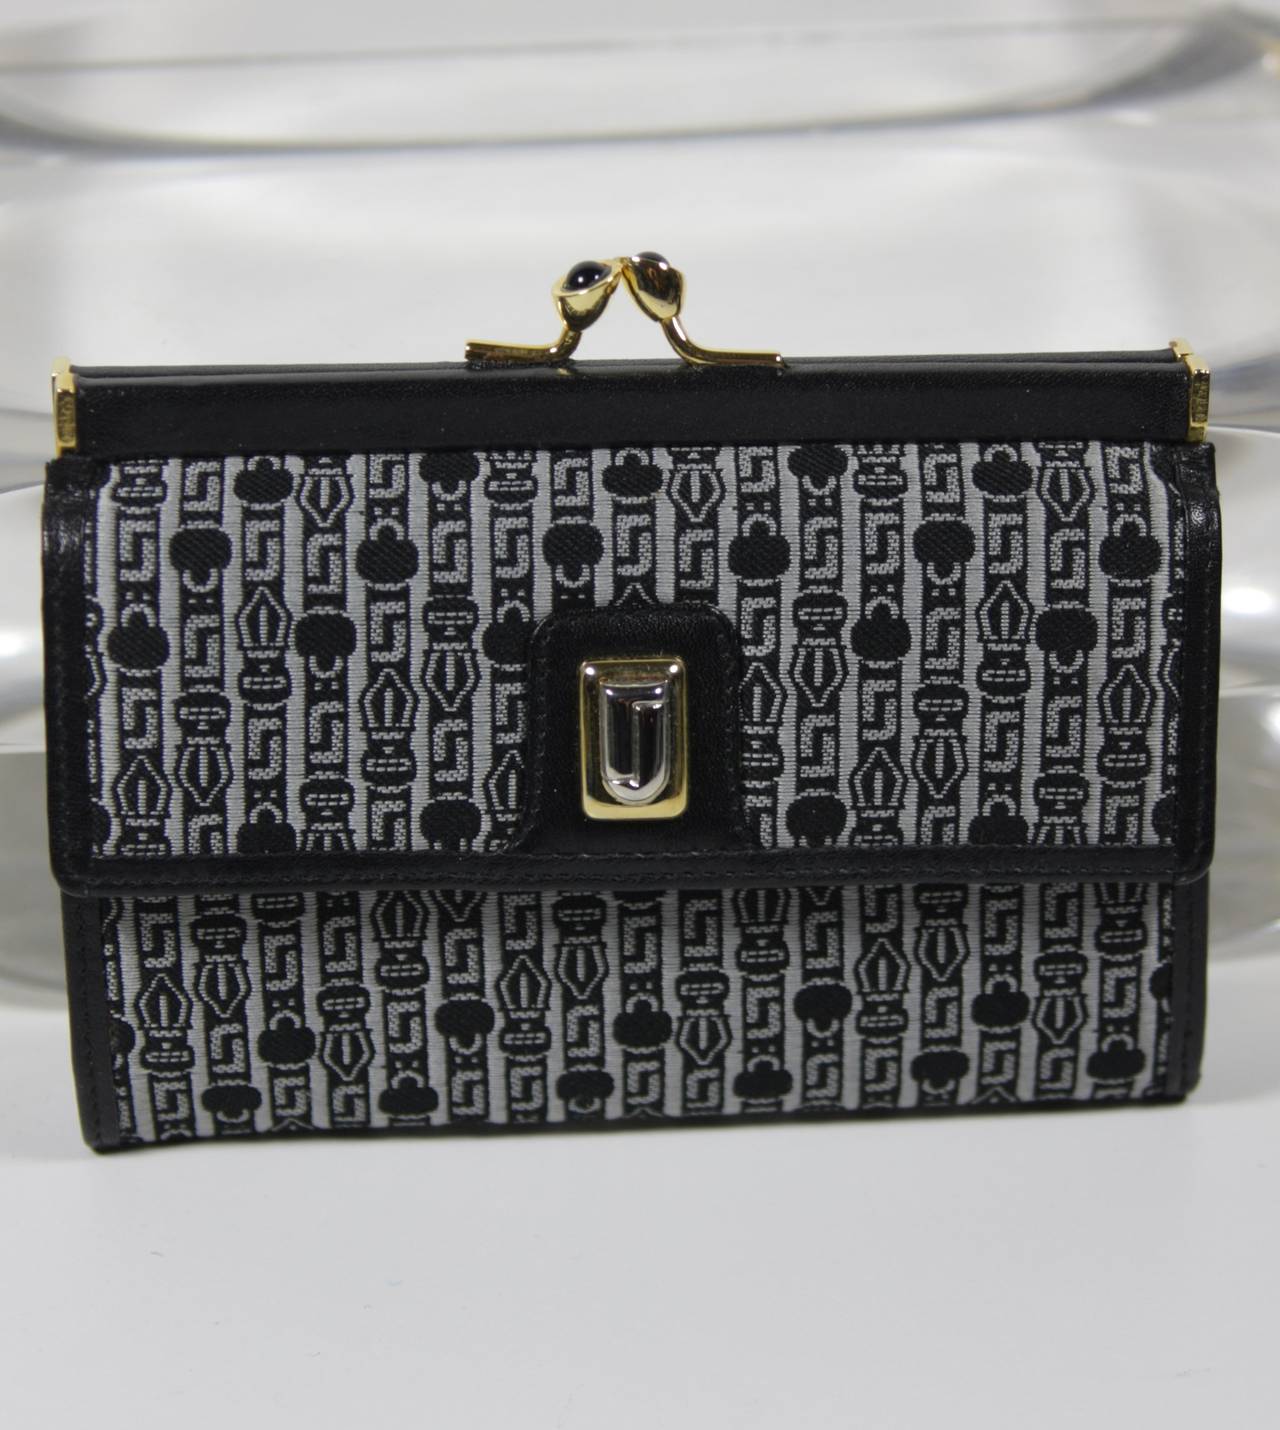 This vintage Judith Leiber is available for viewing at our Beverly Hills Boutique. We offer a large selection of evening gowns and luxury garments.

This wallet is composed of black and silver printed fabric. The interior is leather. There is a